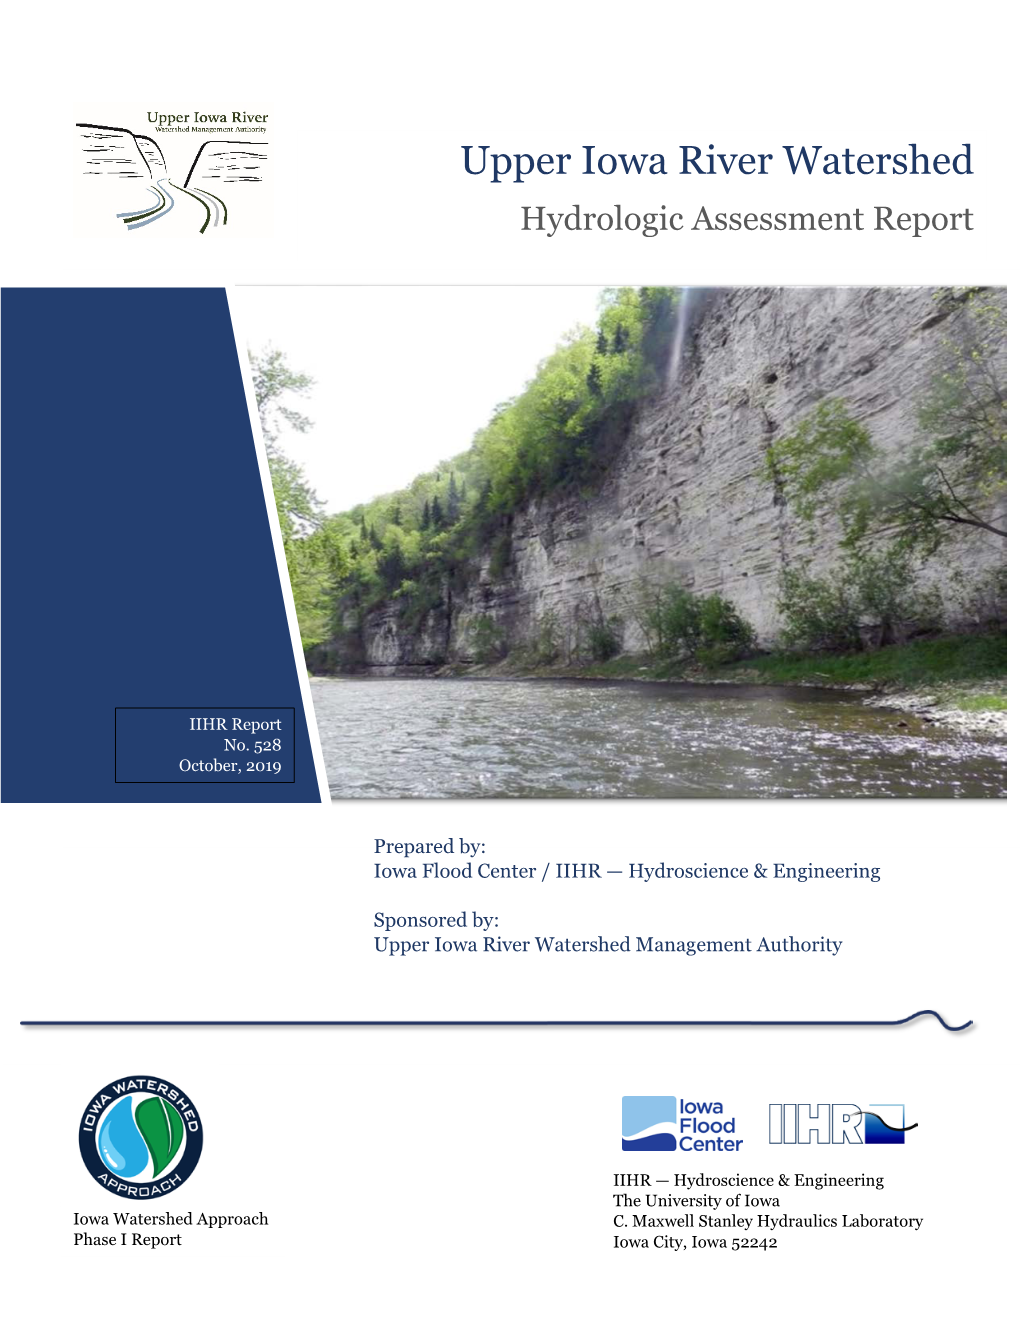 Upper Iowa River Watershed Hydrologic Assessment Report